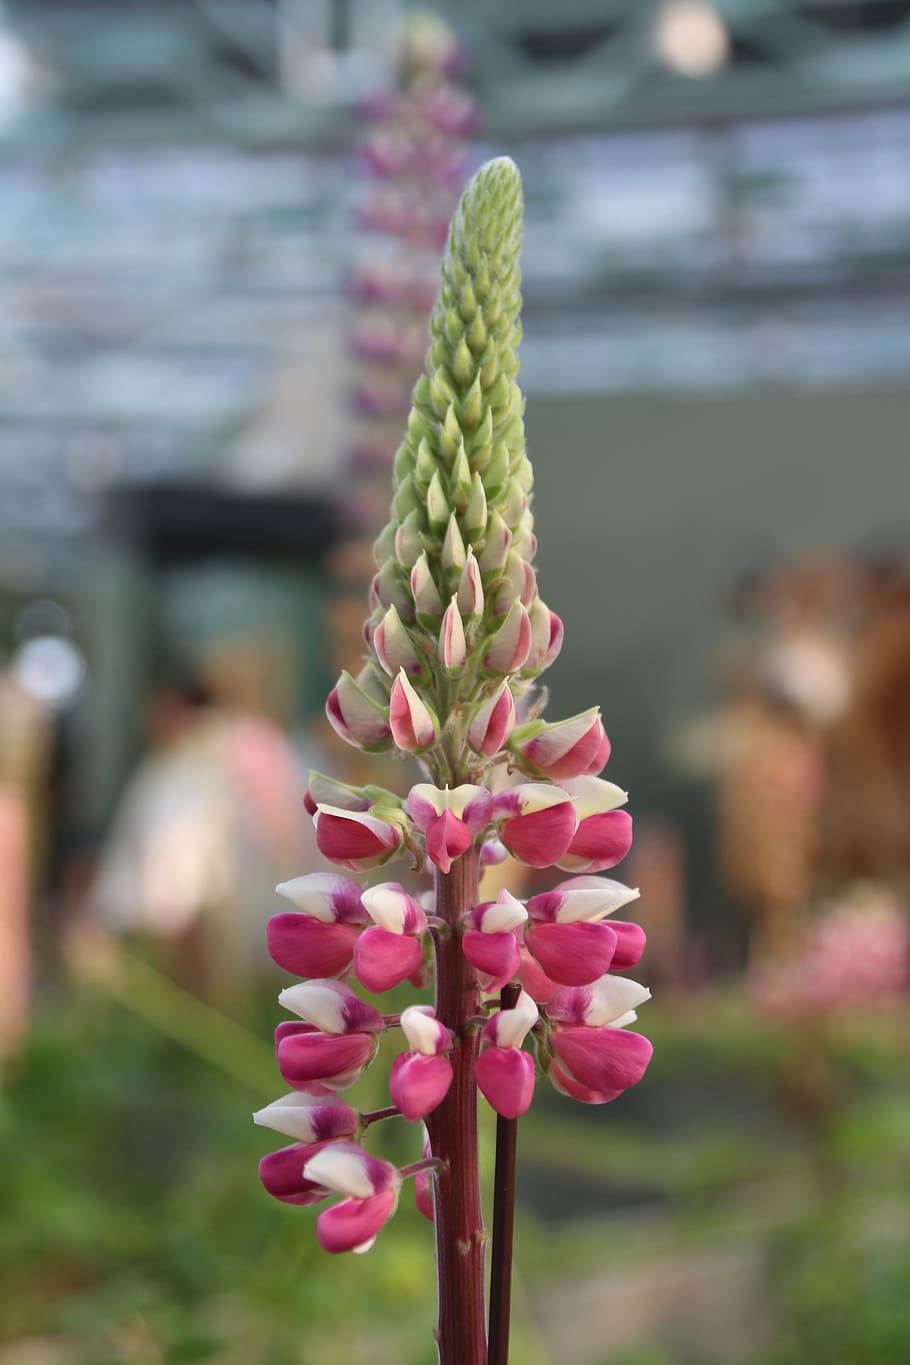 lupine, fuchsia, flower, xie, nature, bird's flowers, flowering plant, focus on foreground, beauty in nature, plant